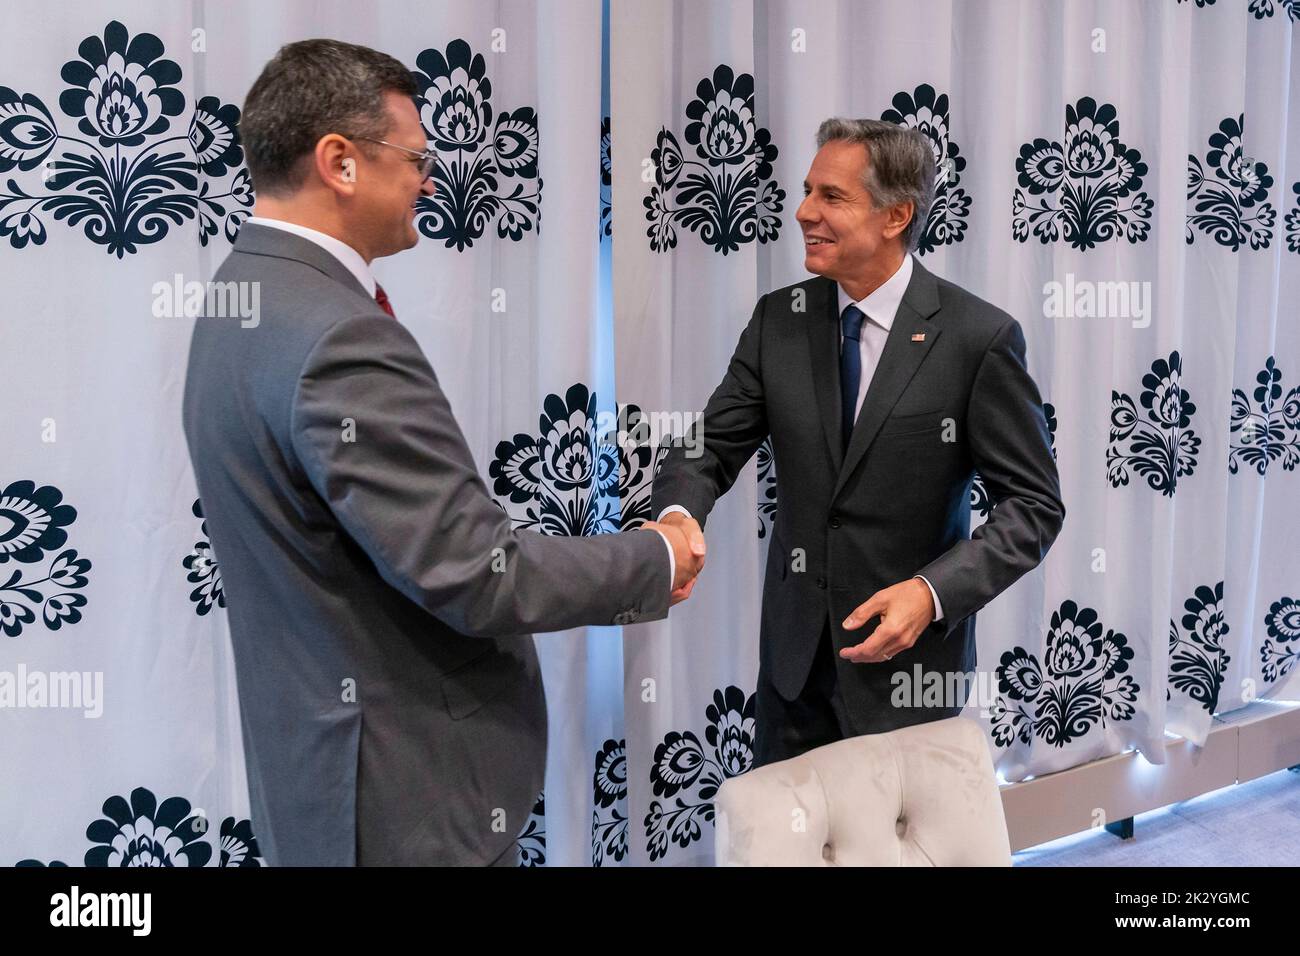 New York City, United States. 22nd Sep, 2022. U.S. Secretary of State Tony Blinken, right, welcomes Ukrainian Foreign Minister Dmytro Kuleba, left, before the start of their bilateral meeting on the sidelines of the 77th Session of the U.N General Assembly, September 22, 2022, in New York City. Credit: Ron Przysucha/State Department Photo/Alamy Live News Stock Photo